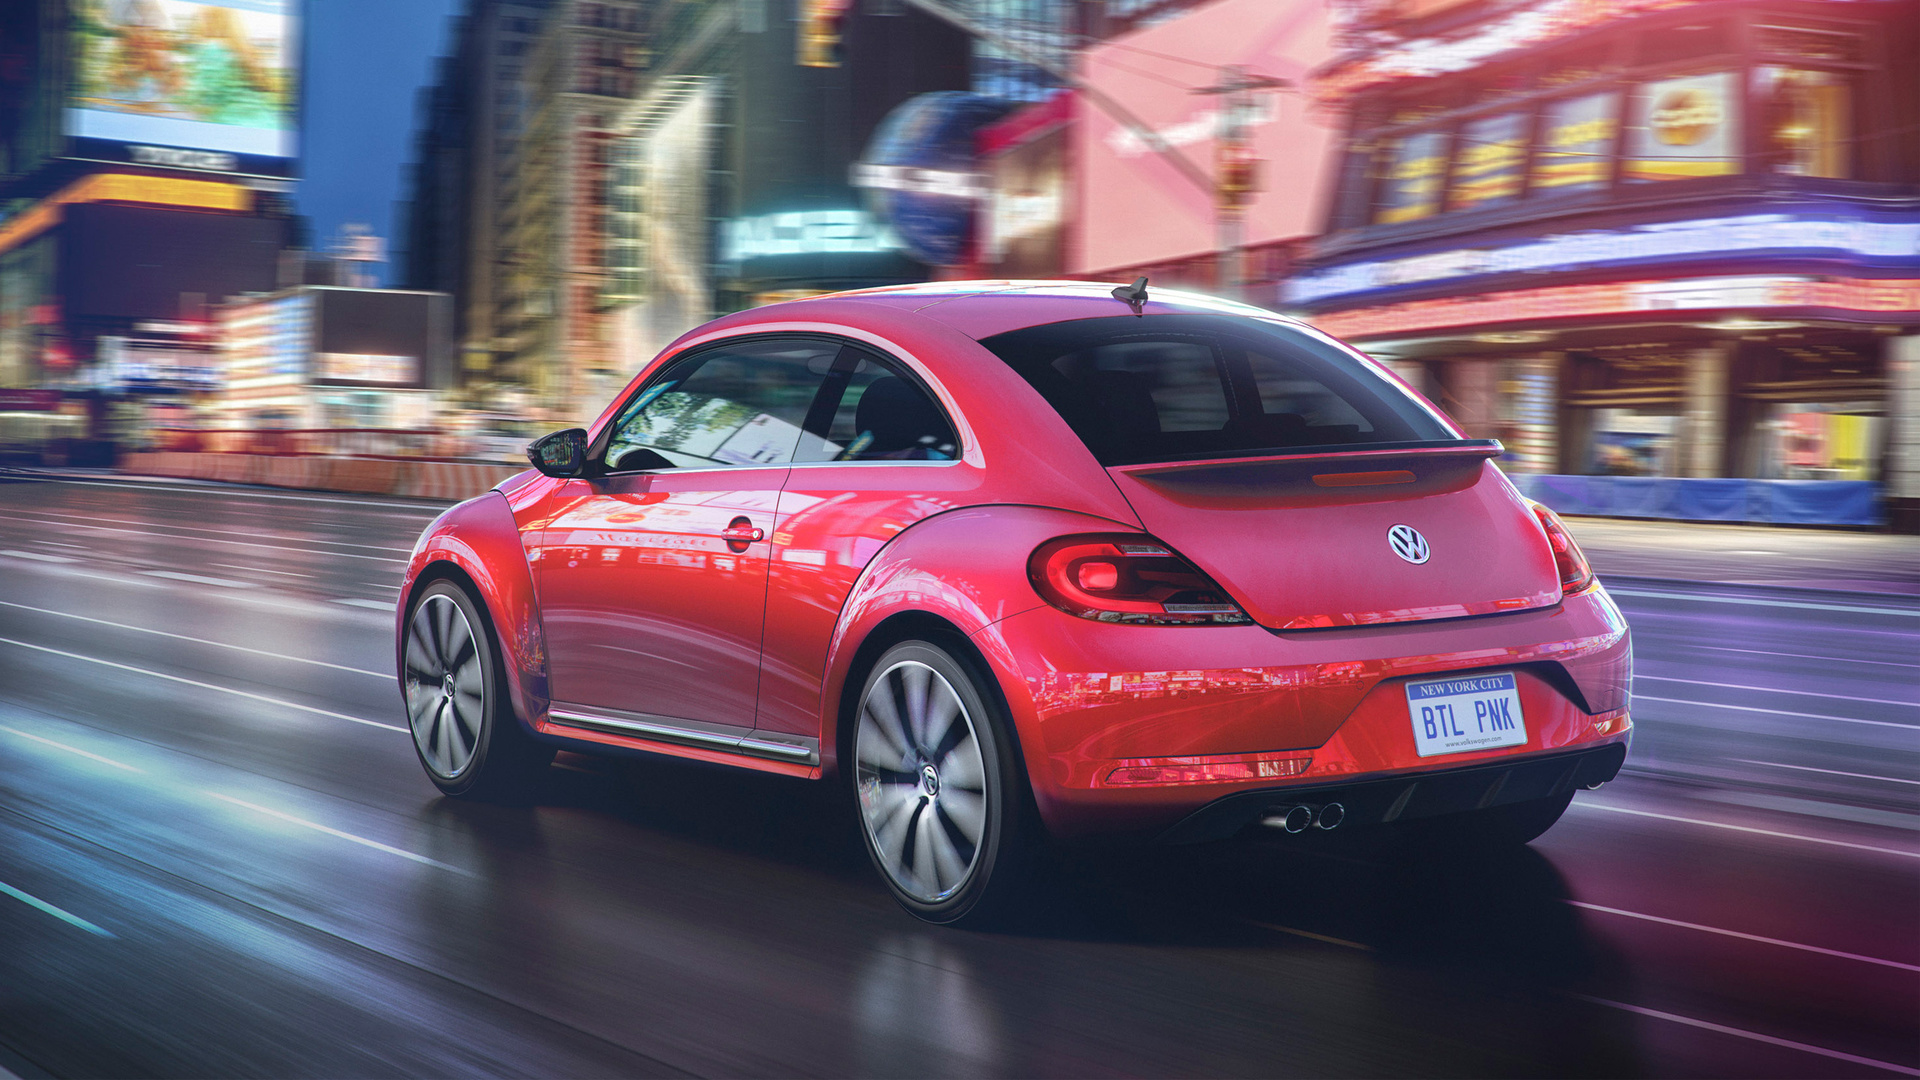 2017, volkswagen, beetle, pink, limited edition